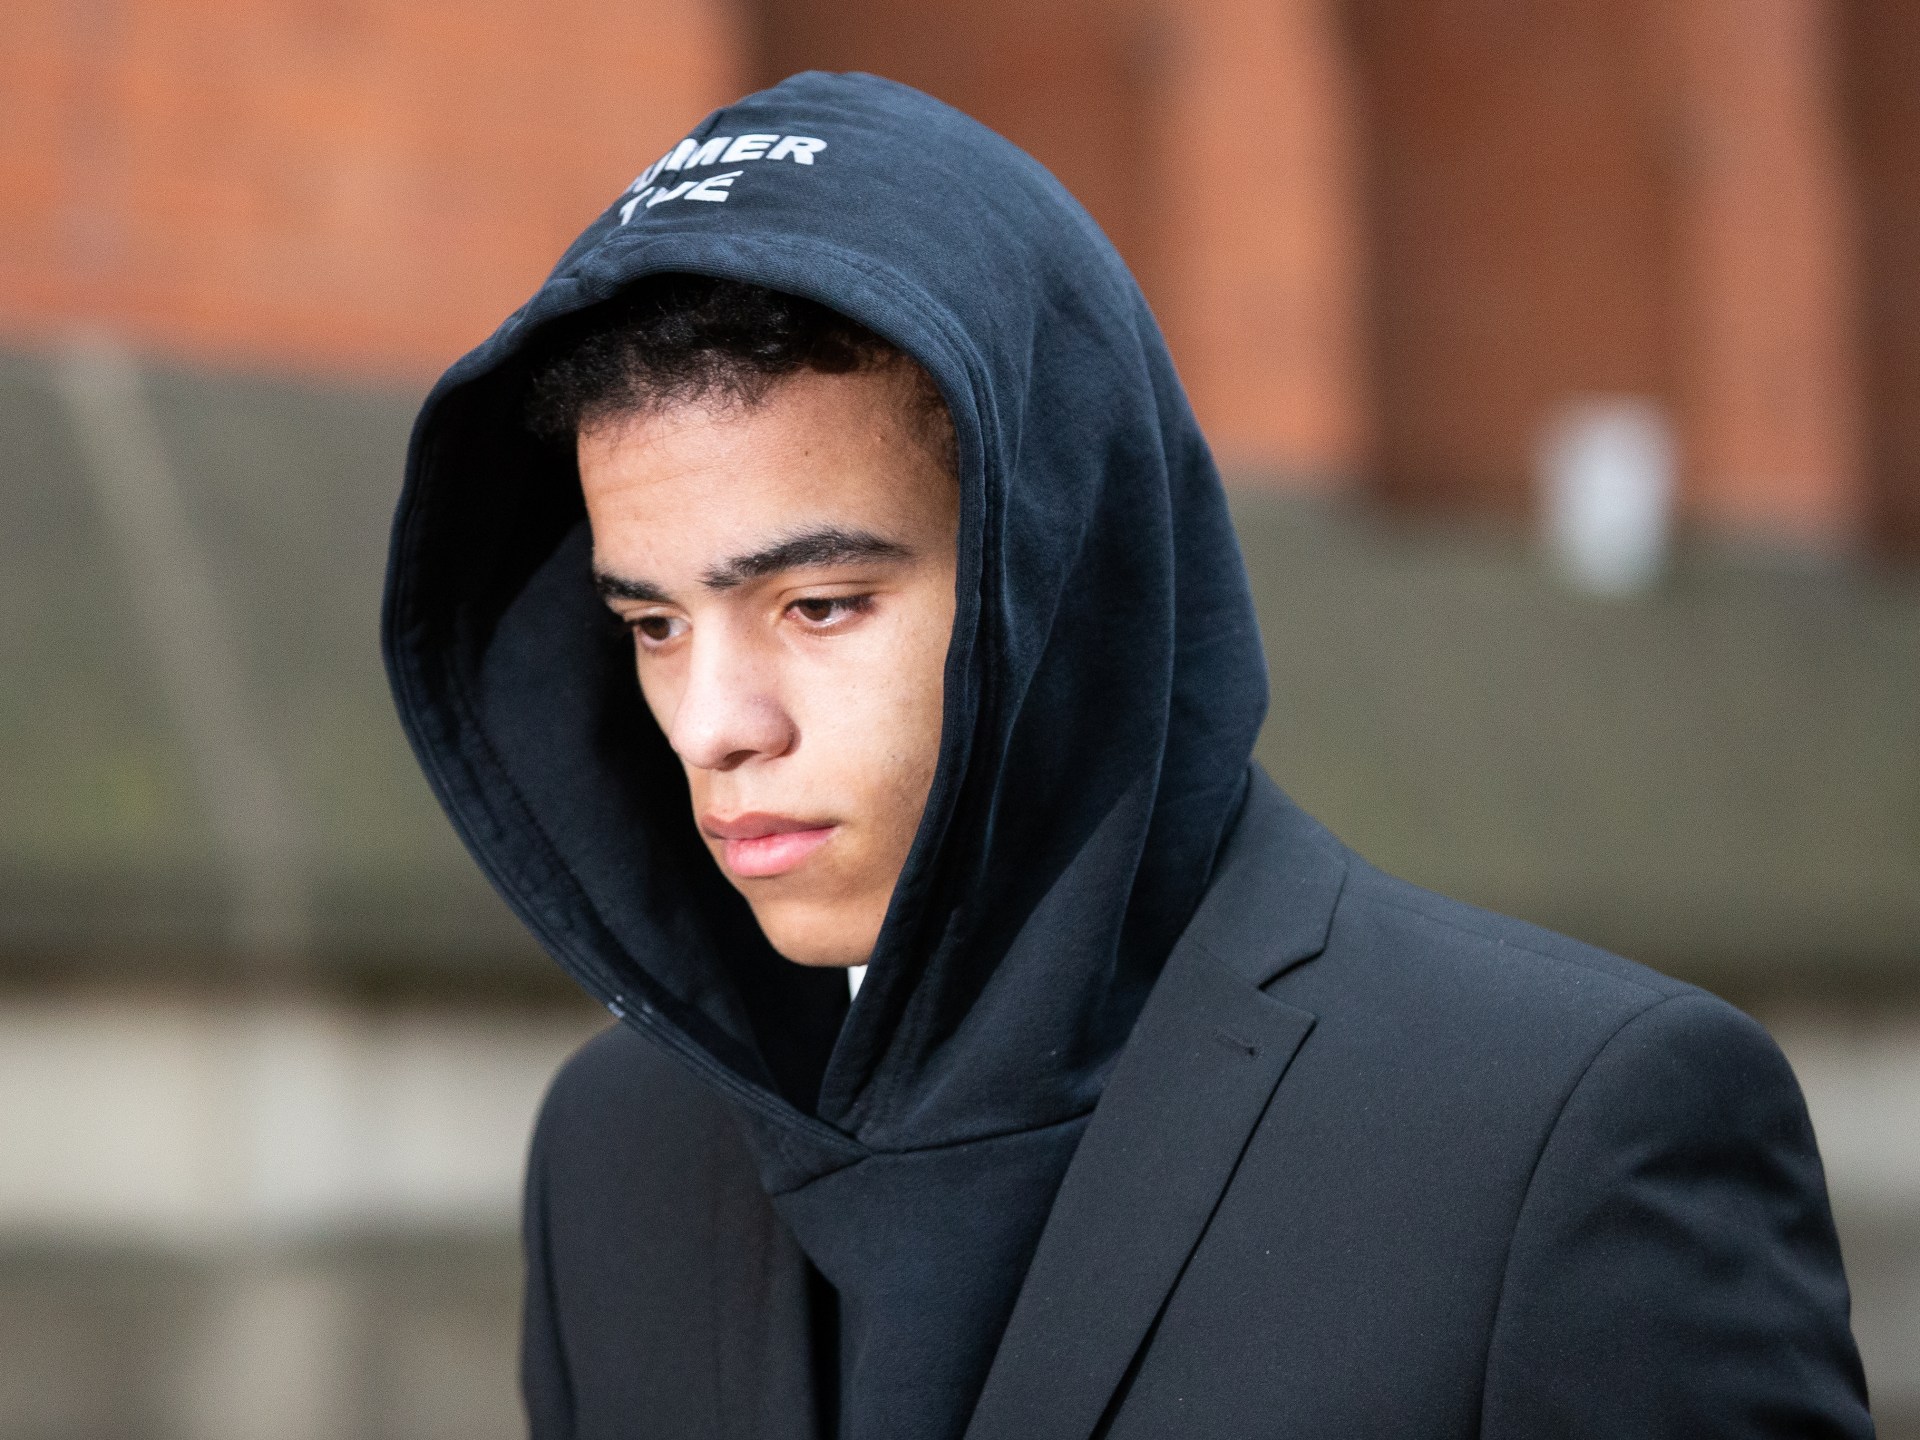 Rape charge against Man United player Greenwood dropped | Football News